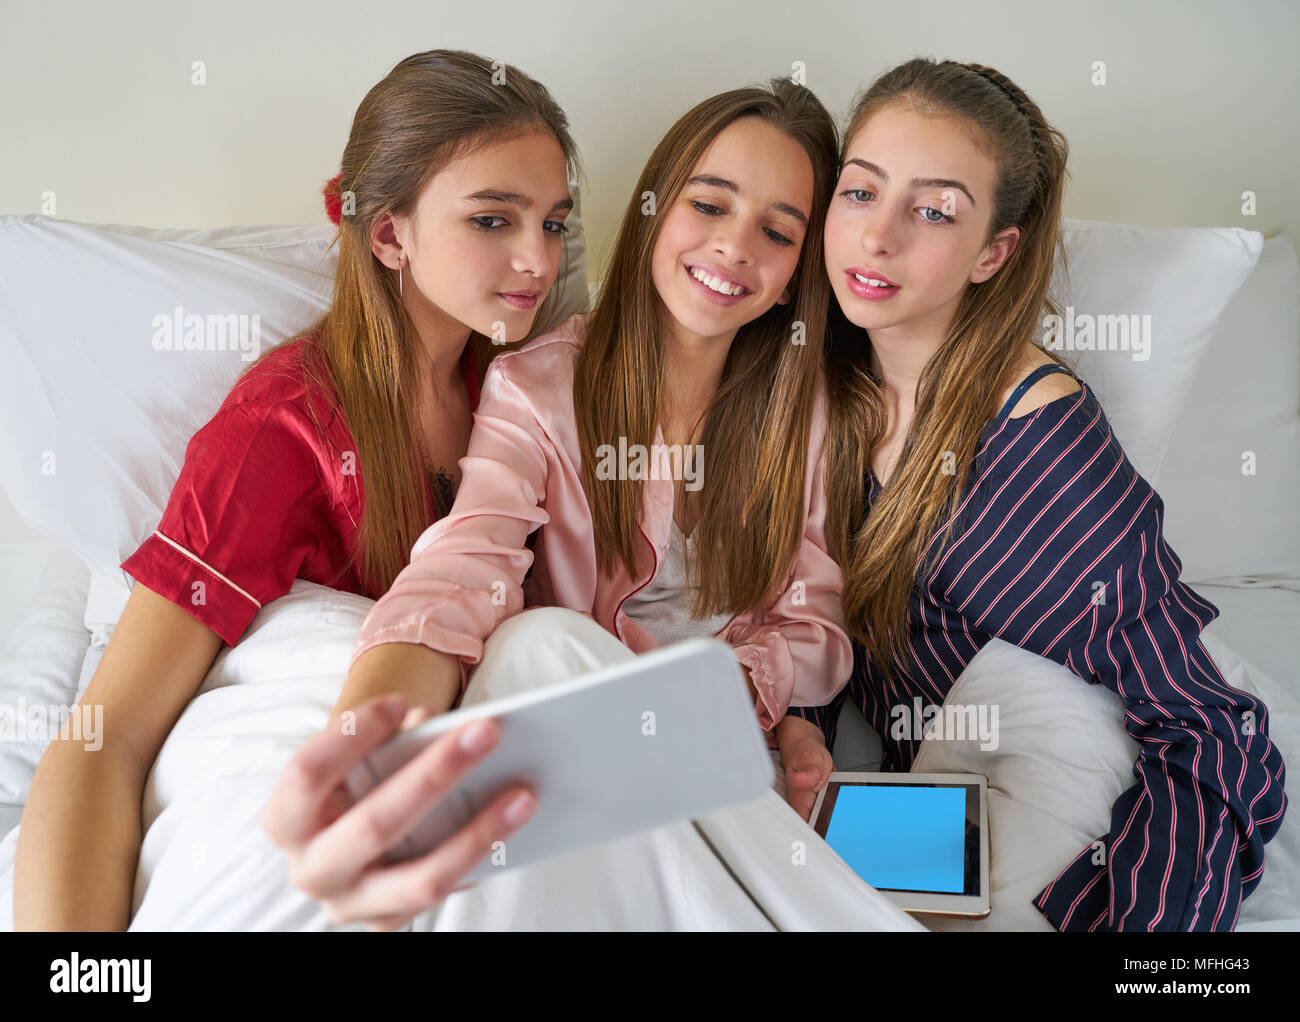 Bed party. Pyjama party at home Stock Photo - Alamy